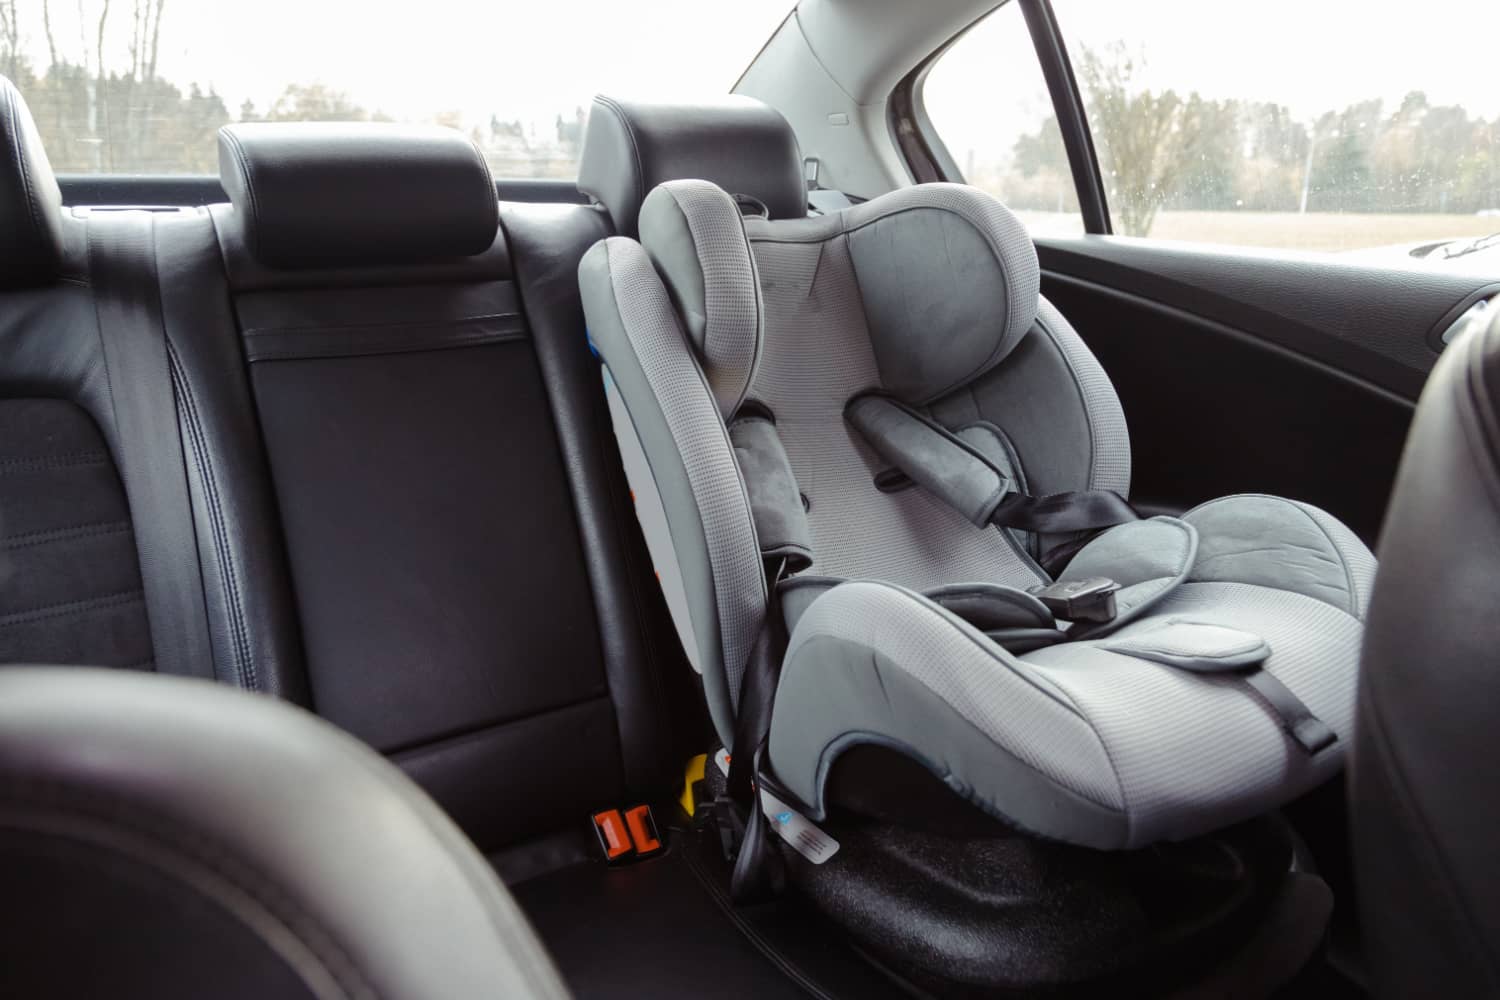 Tips to Buy an Infant Car Seat..